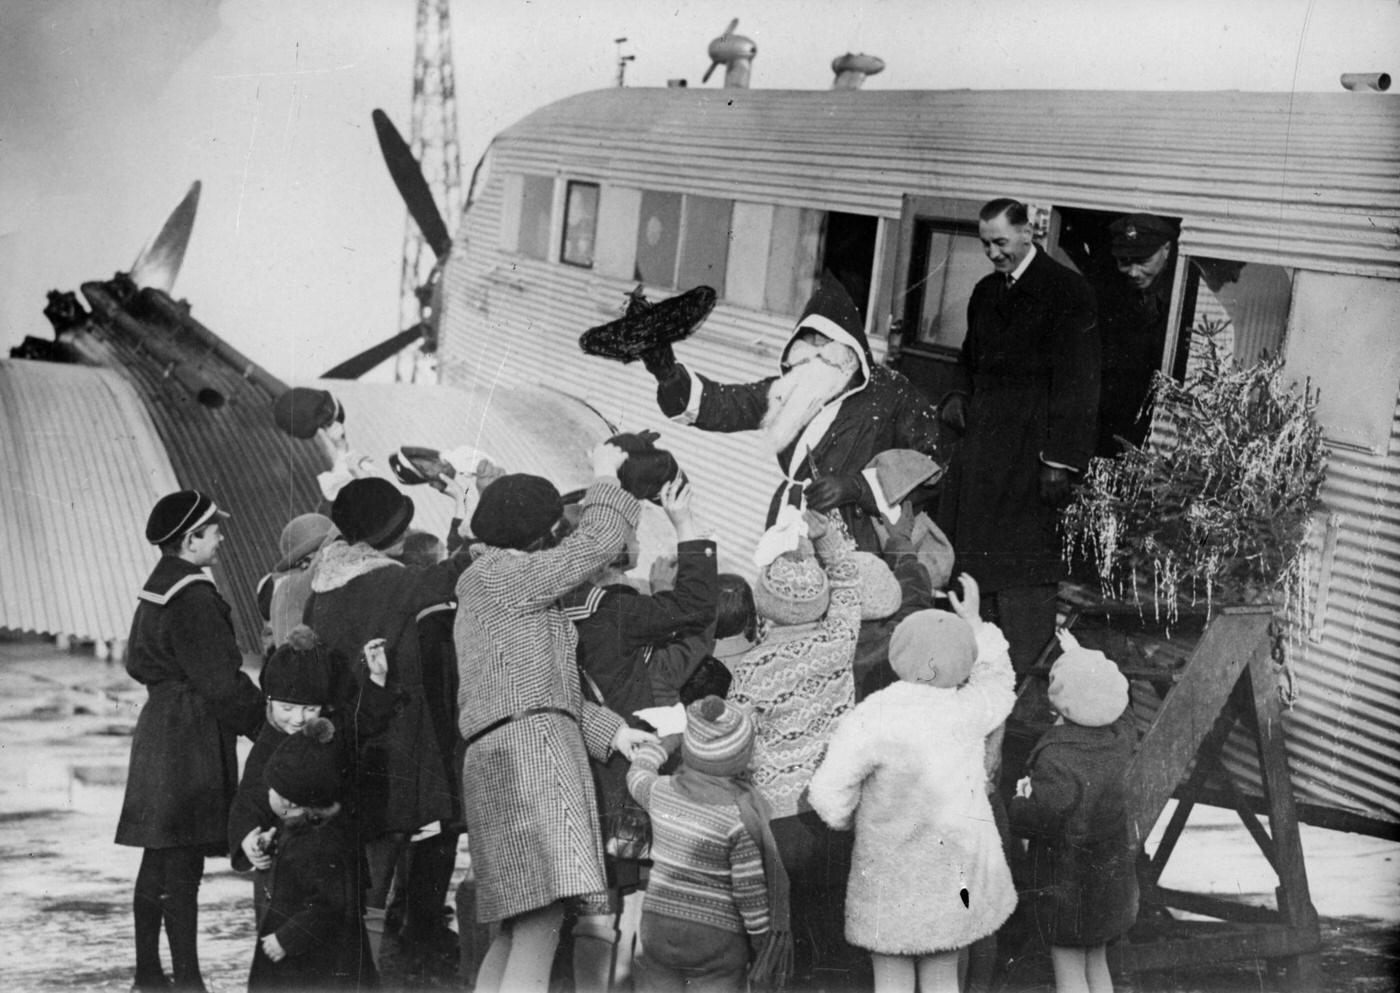 Children welcome Santa Claus as he disembarks his plane in a photograph from around 1930.